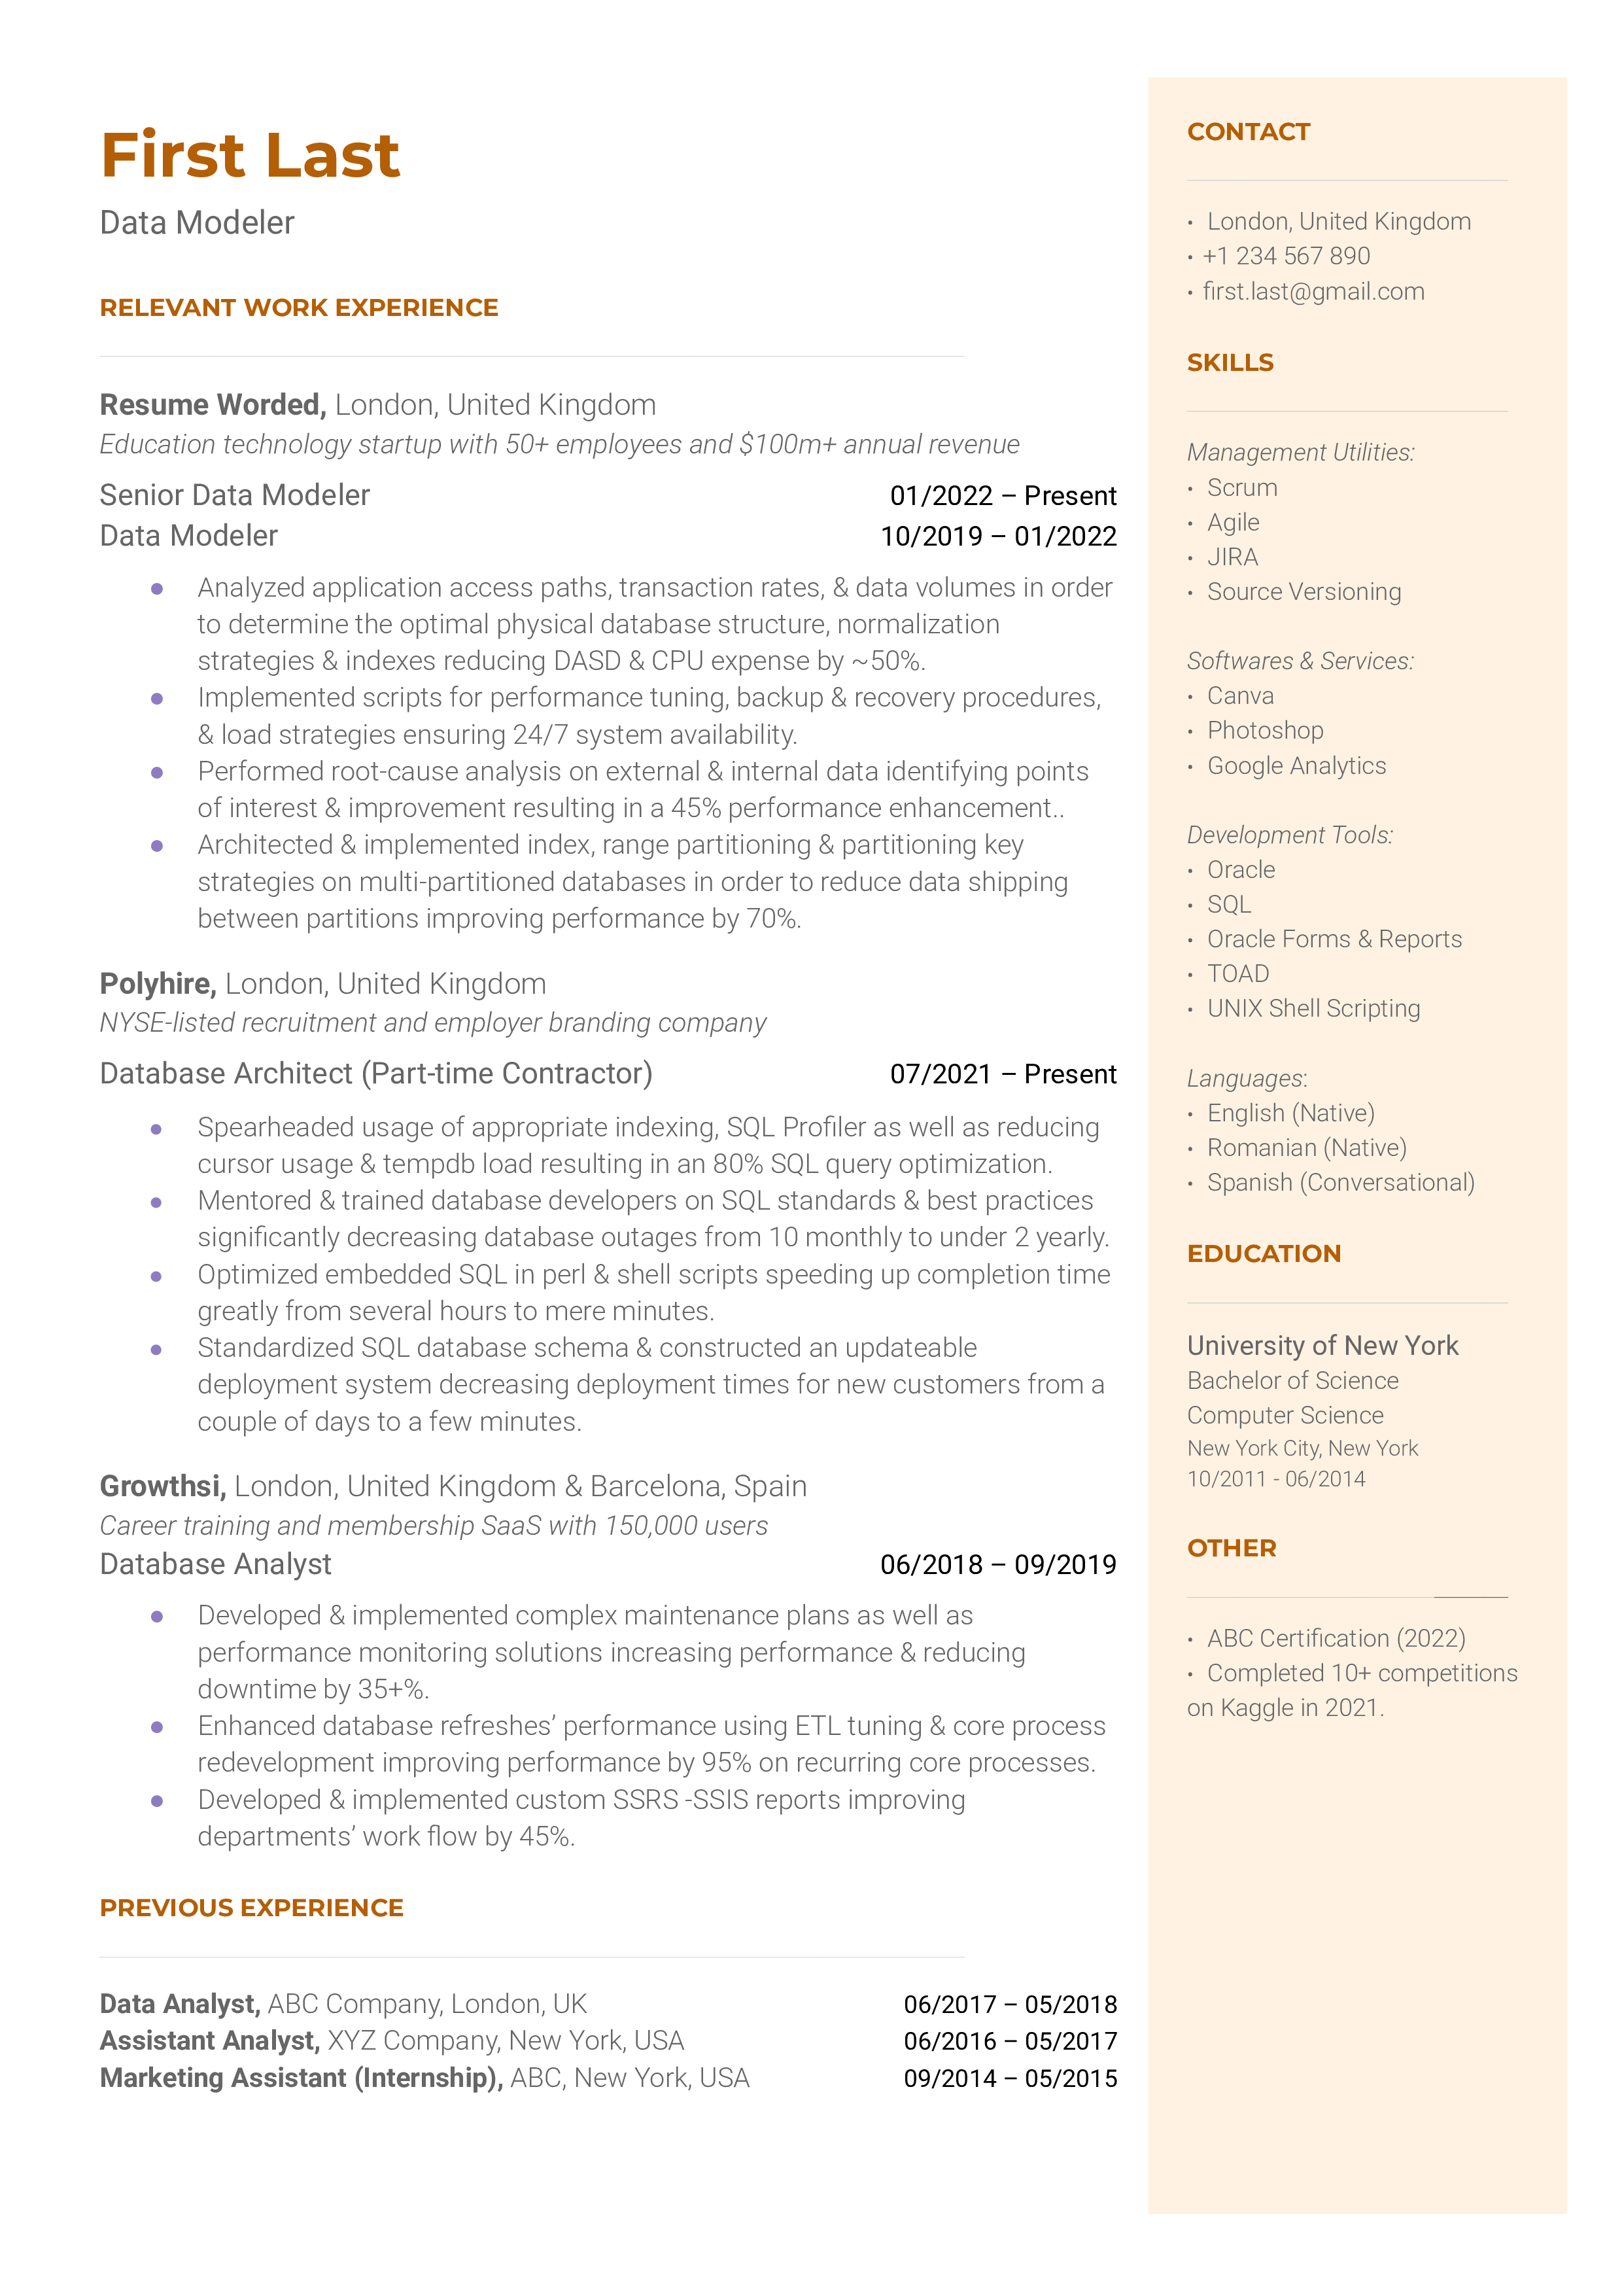 A data modeler resume template showing the applicant's experience in various data modeling techniques and technologies.